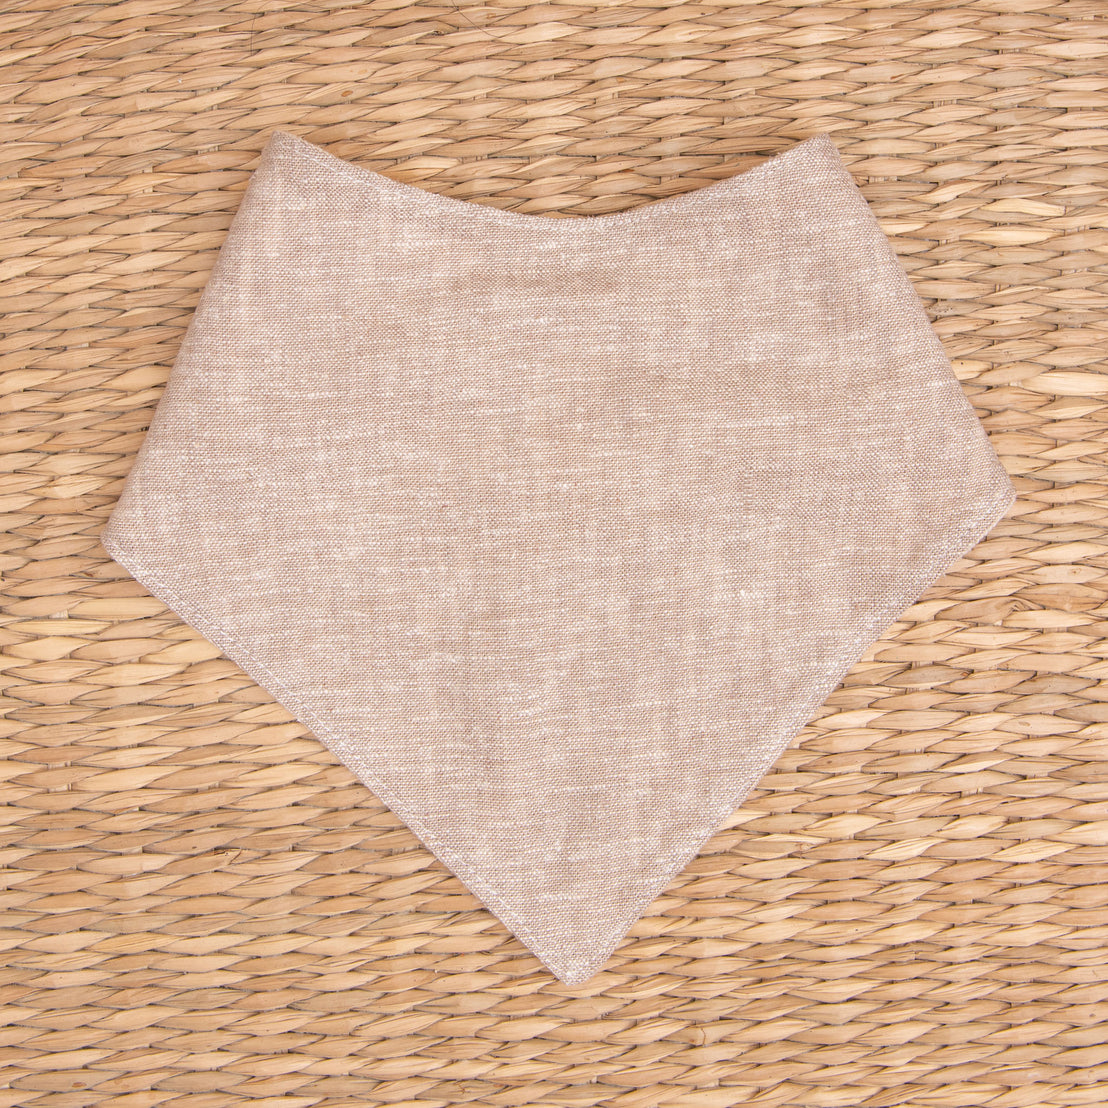 Flat lay photo of the sand colored Silas Bandana Bib in a woven basket